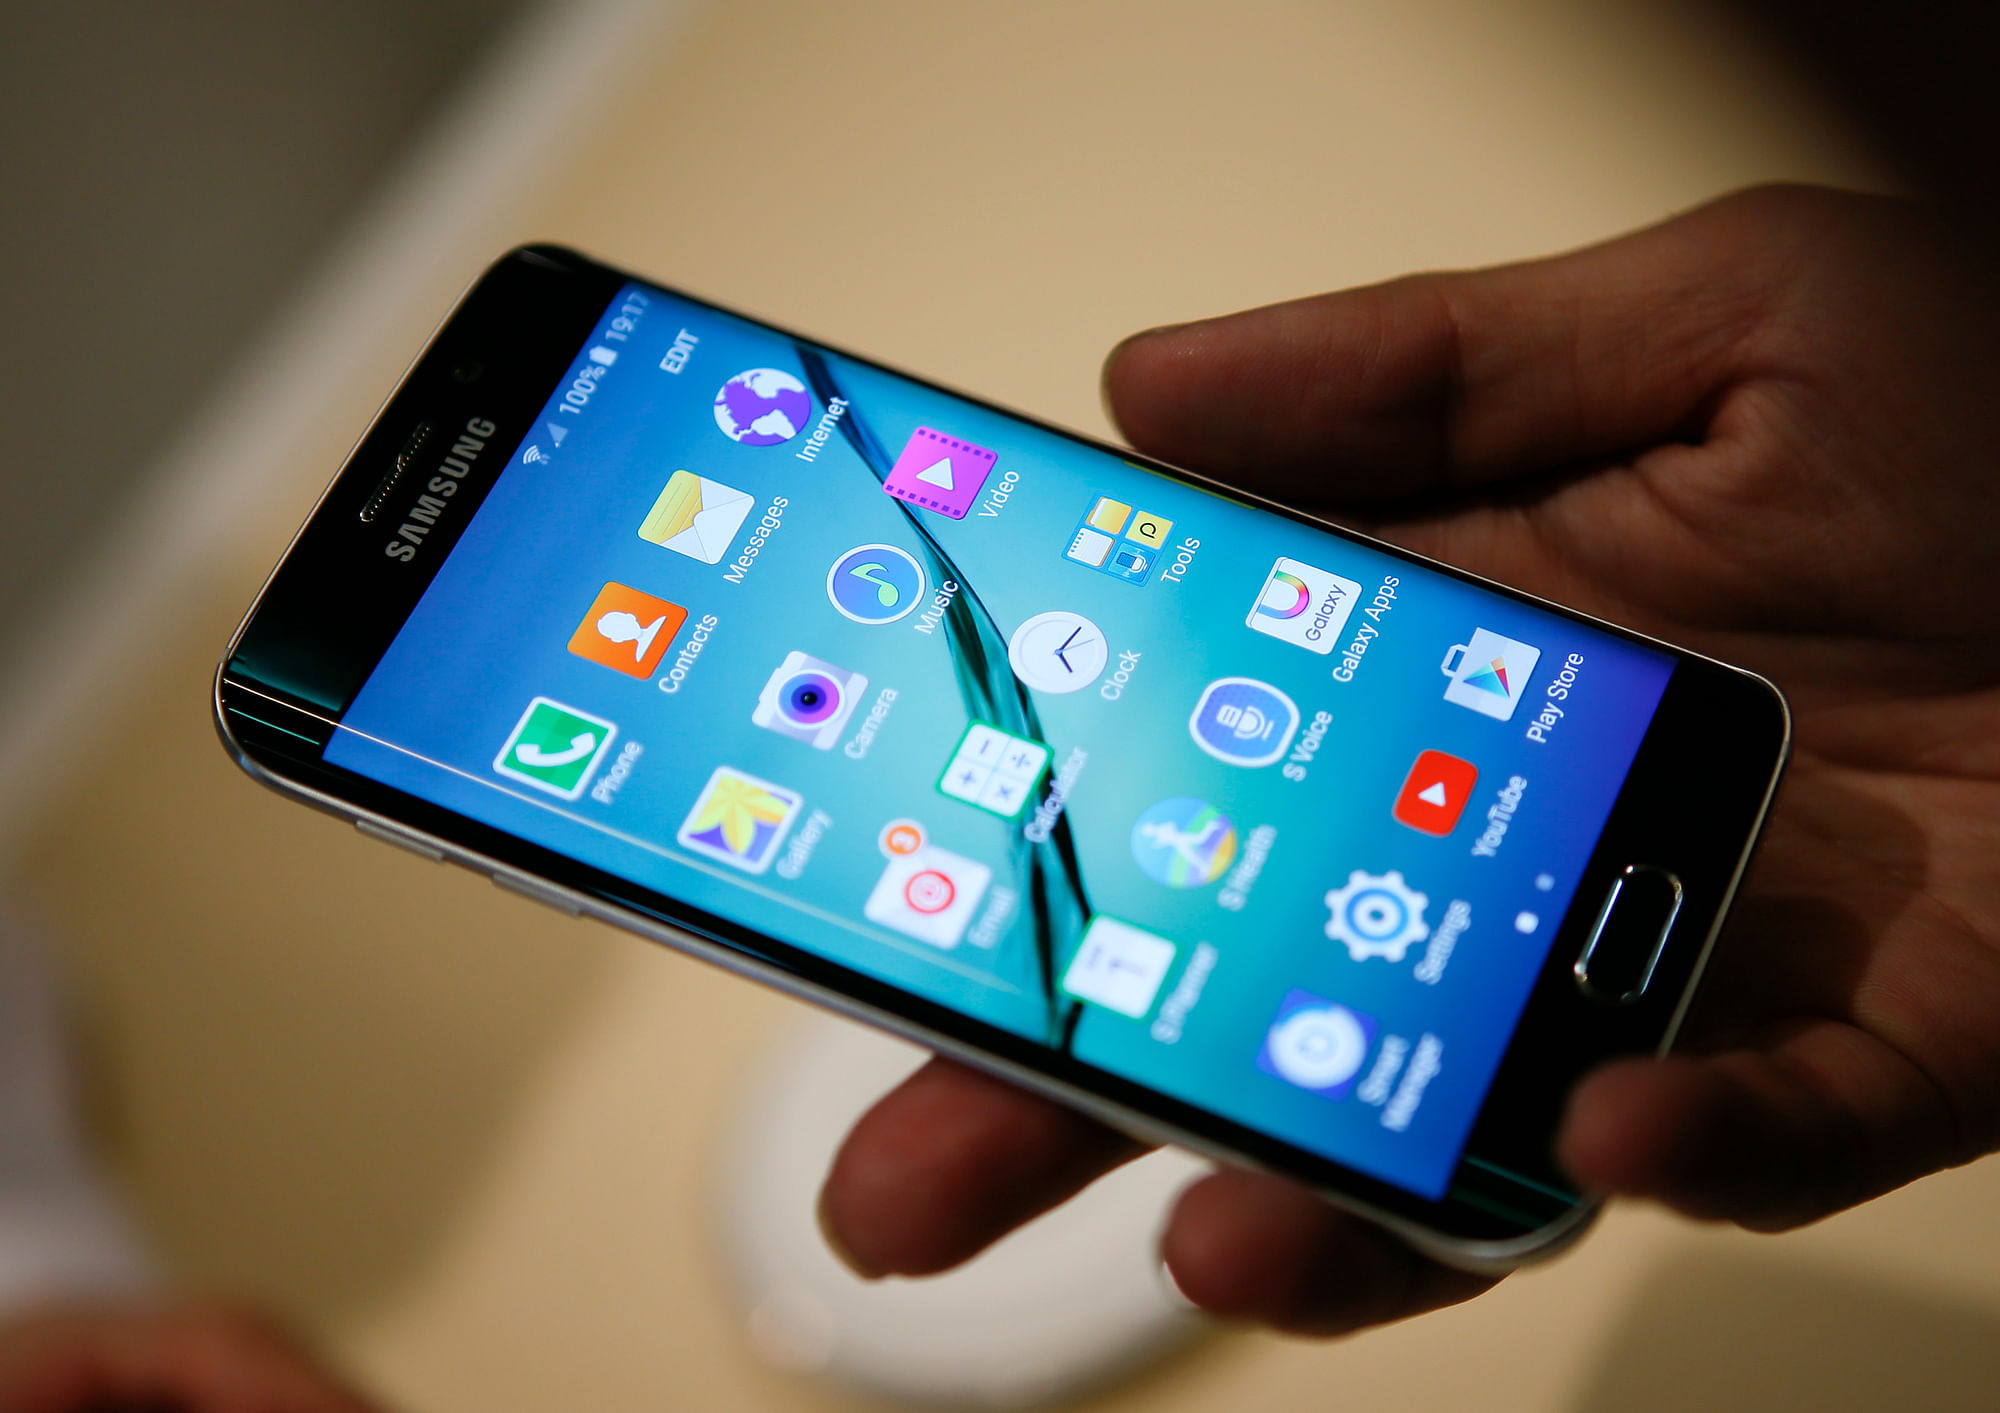 The Galaxy S6 Edge smartphone at the Samsung Galaxy Unpacked event before the Mobile World Congress in Barcelona, March 1, 2015. (Photo: Reuters)